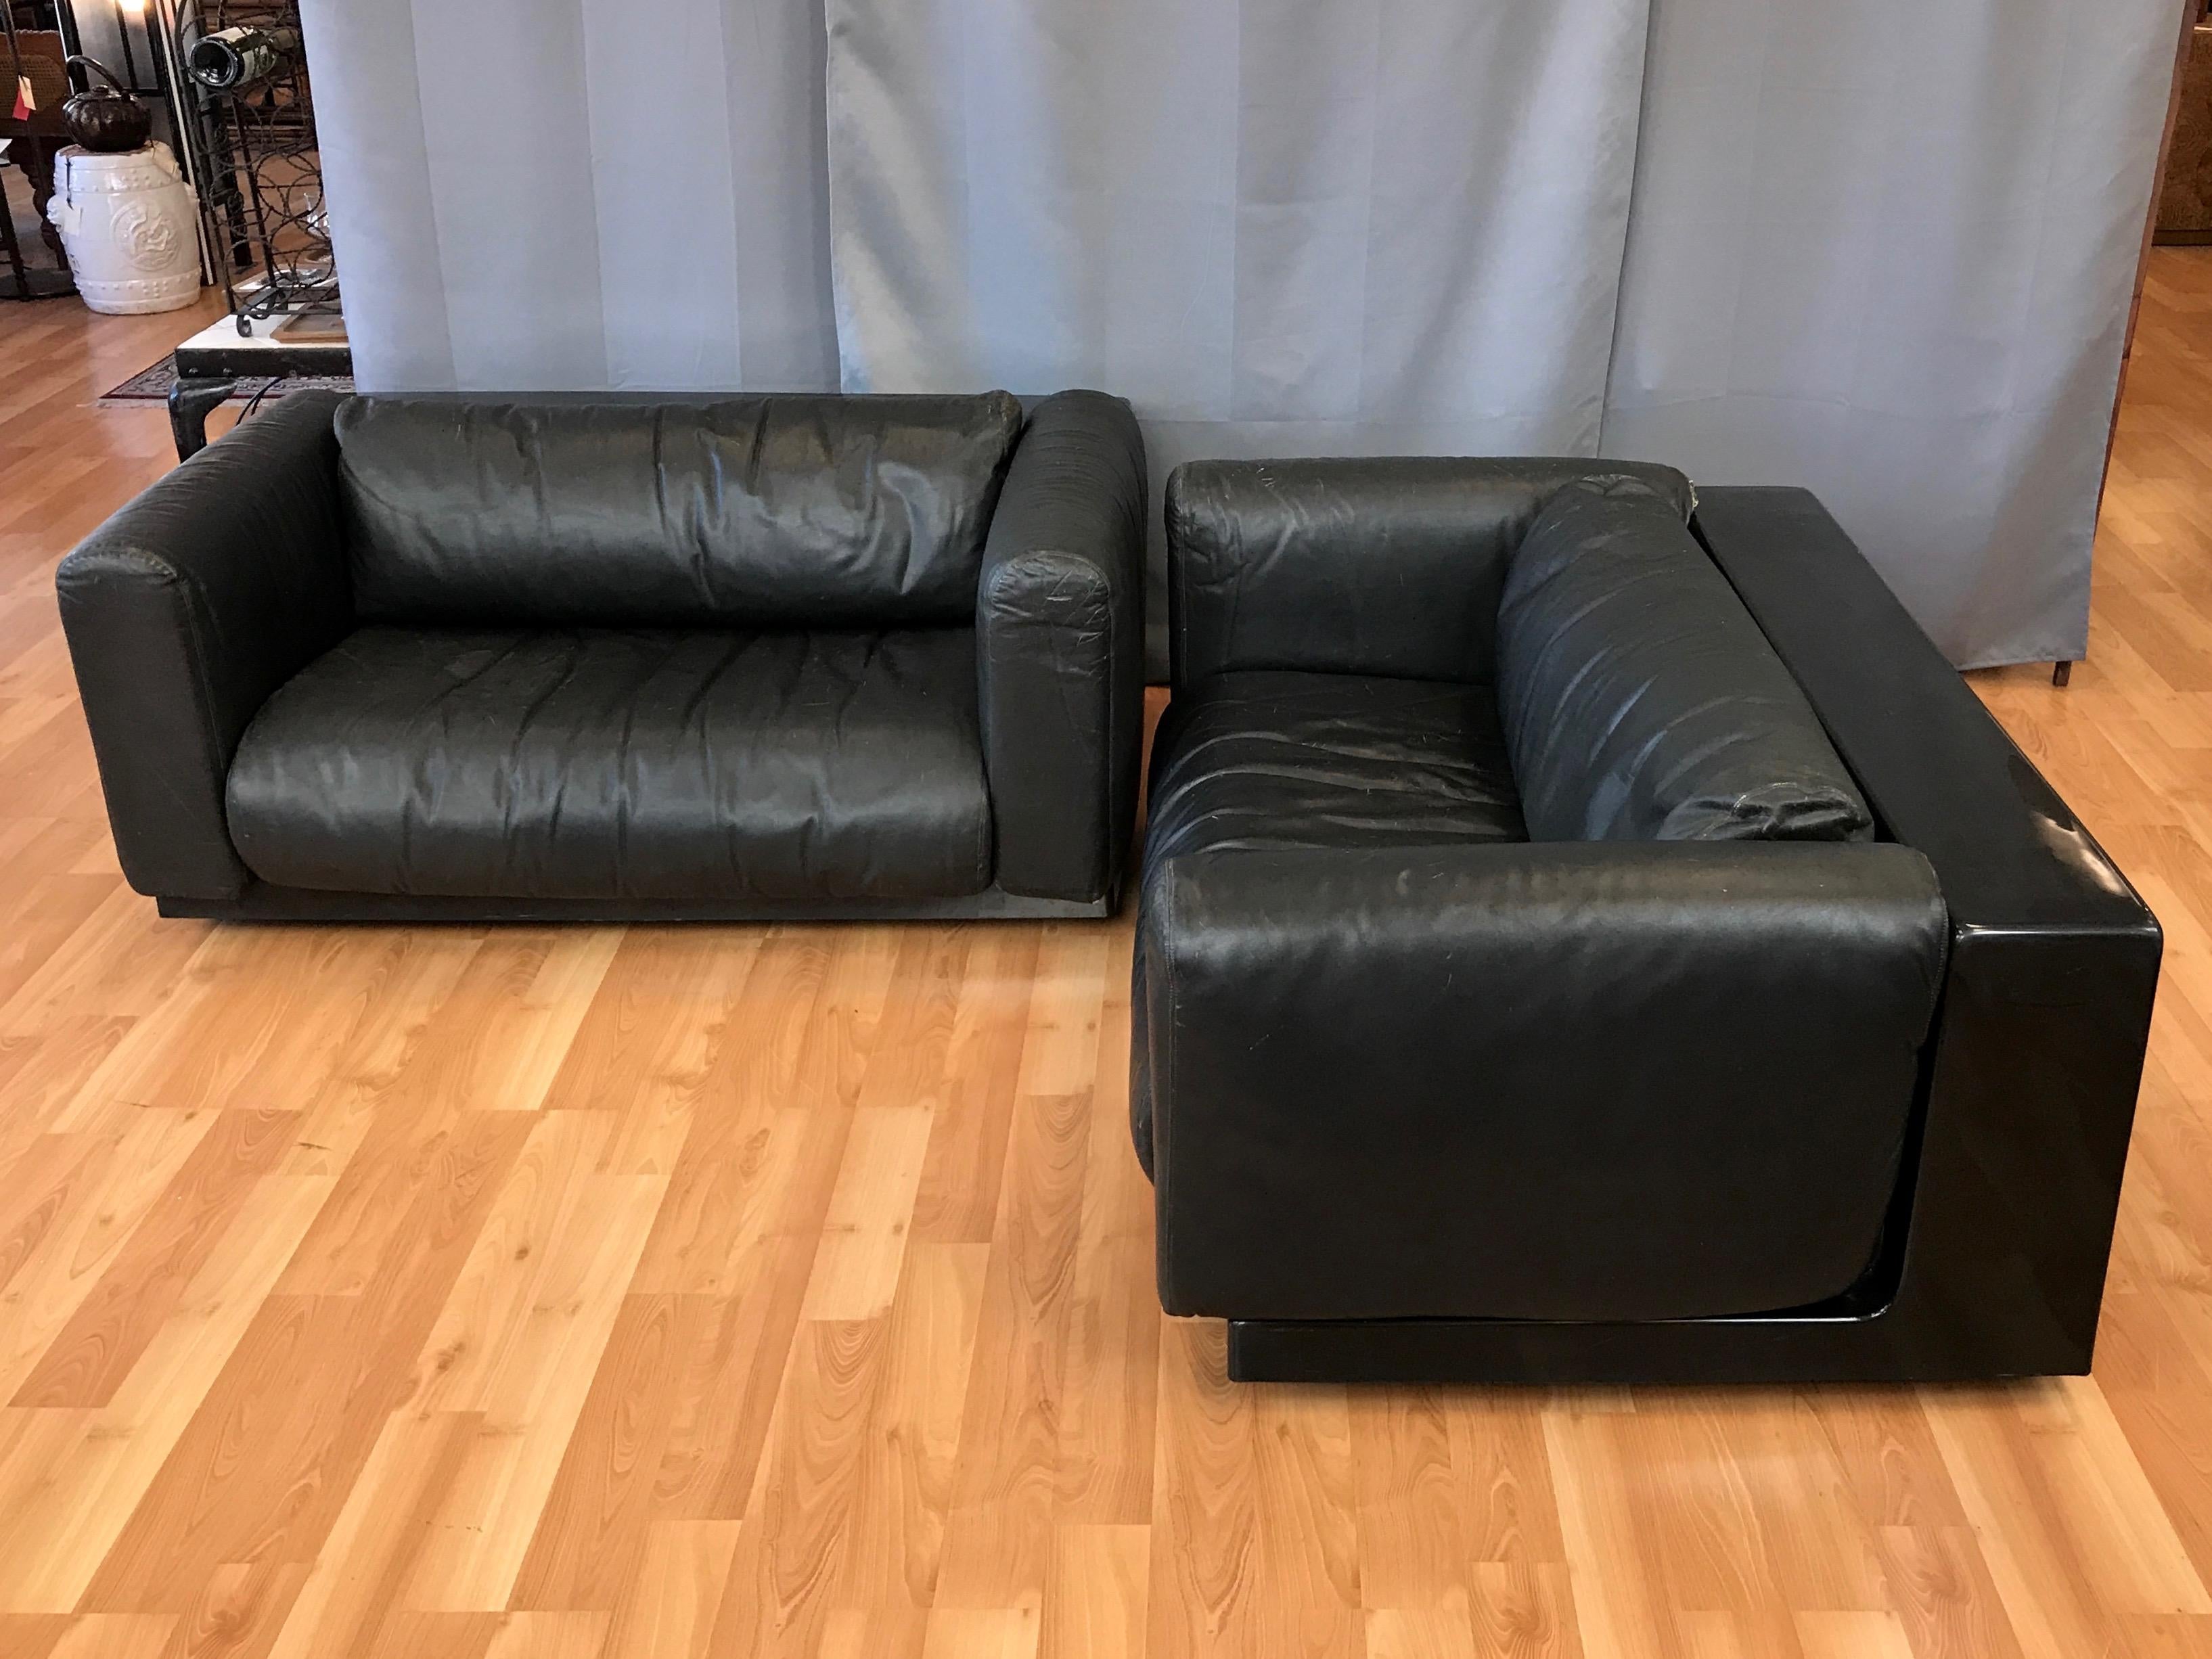 A pair of uncommon black leather and plastic gradual lounge small sofas or love seats by Cini Boeri for Knoll.

Molded black ABS plastic frame is equal parts 1960s mod and 1970s Futurist. Features a deep back with a spacious cubby measuring H 13